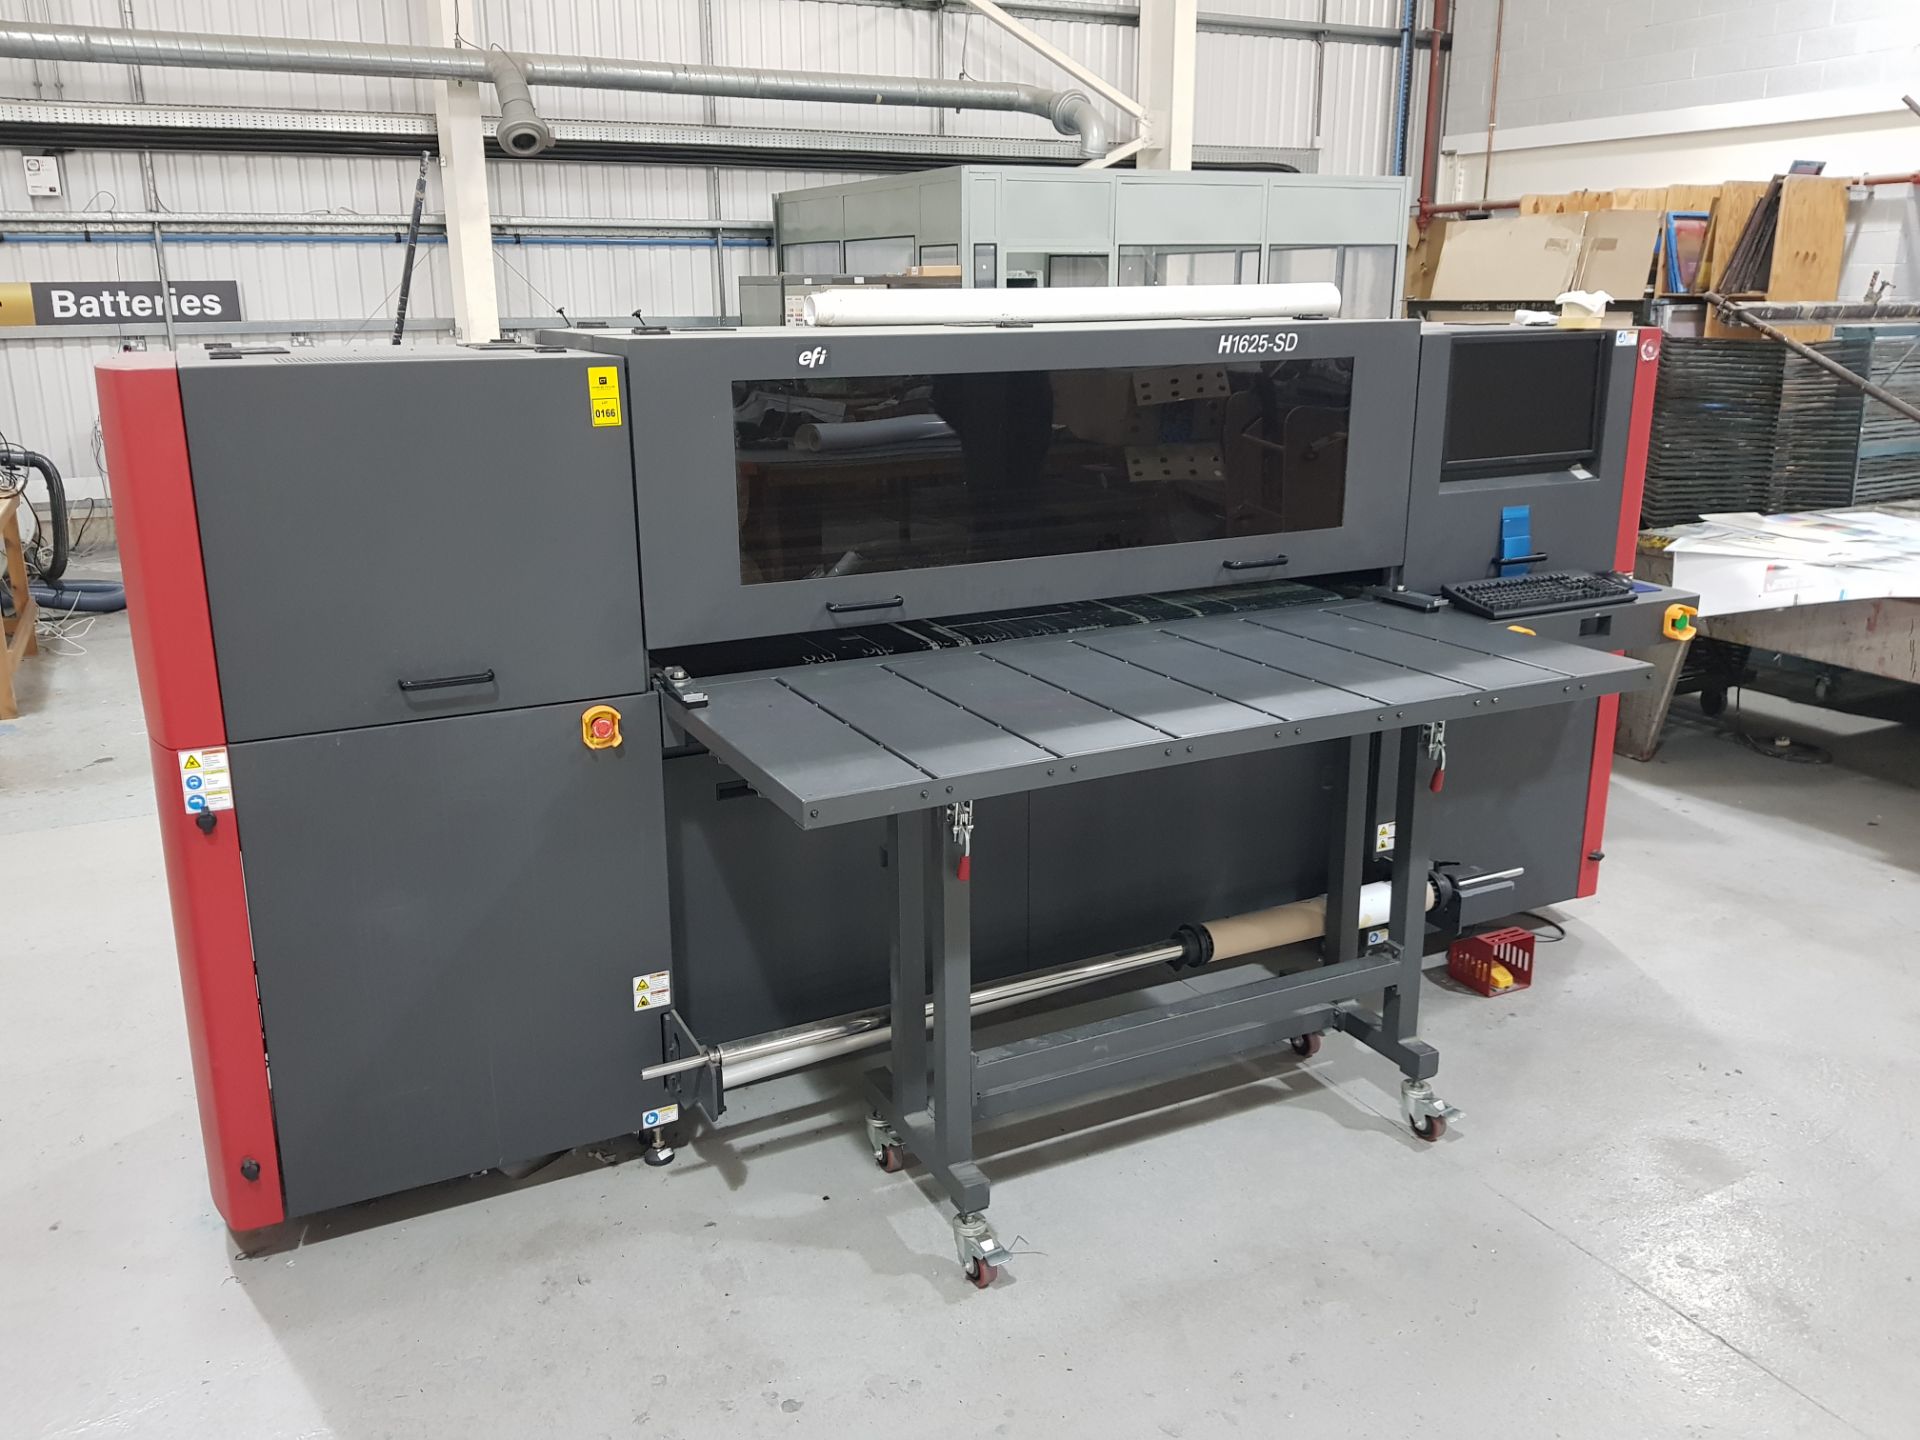 EFI H1625 - SD 1.6M HYBRID INDUSTRIAL PRINTER FOR THERMOFORMING (H1625 - 0007) (2015) (ASSETS - Image 2 of 5